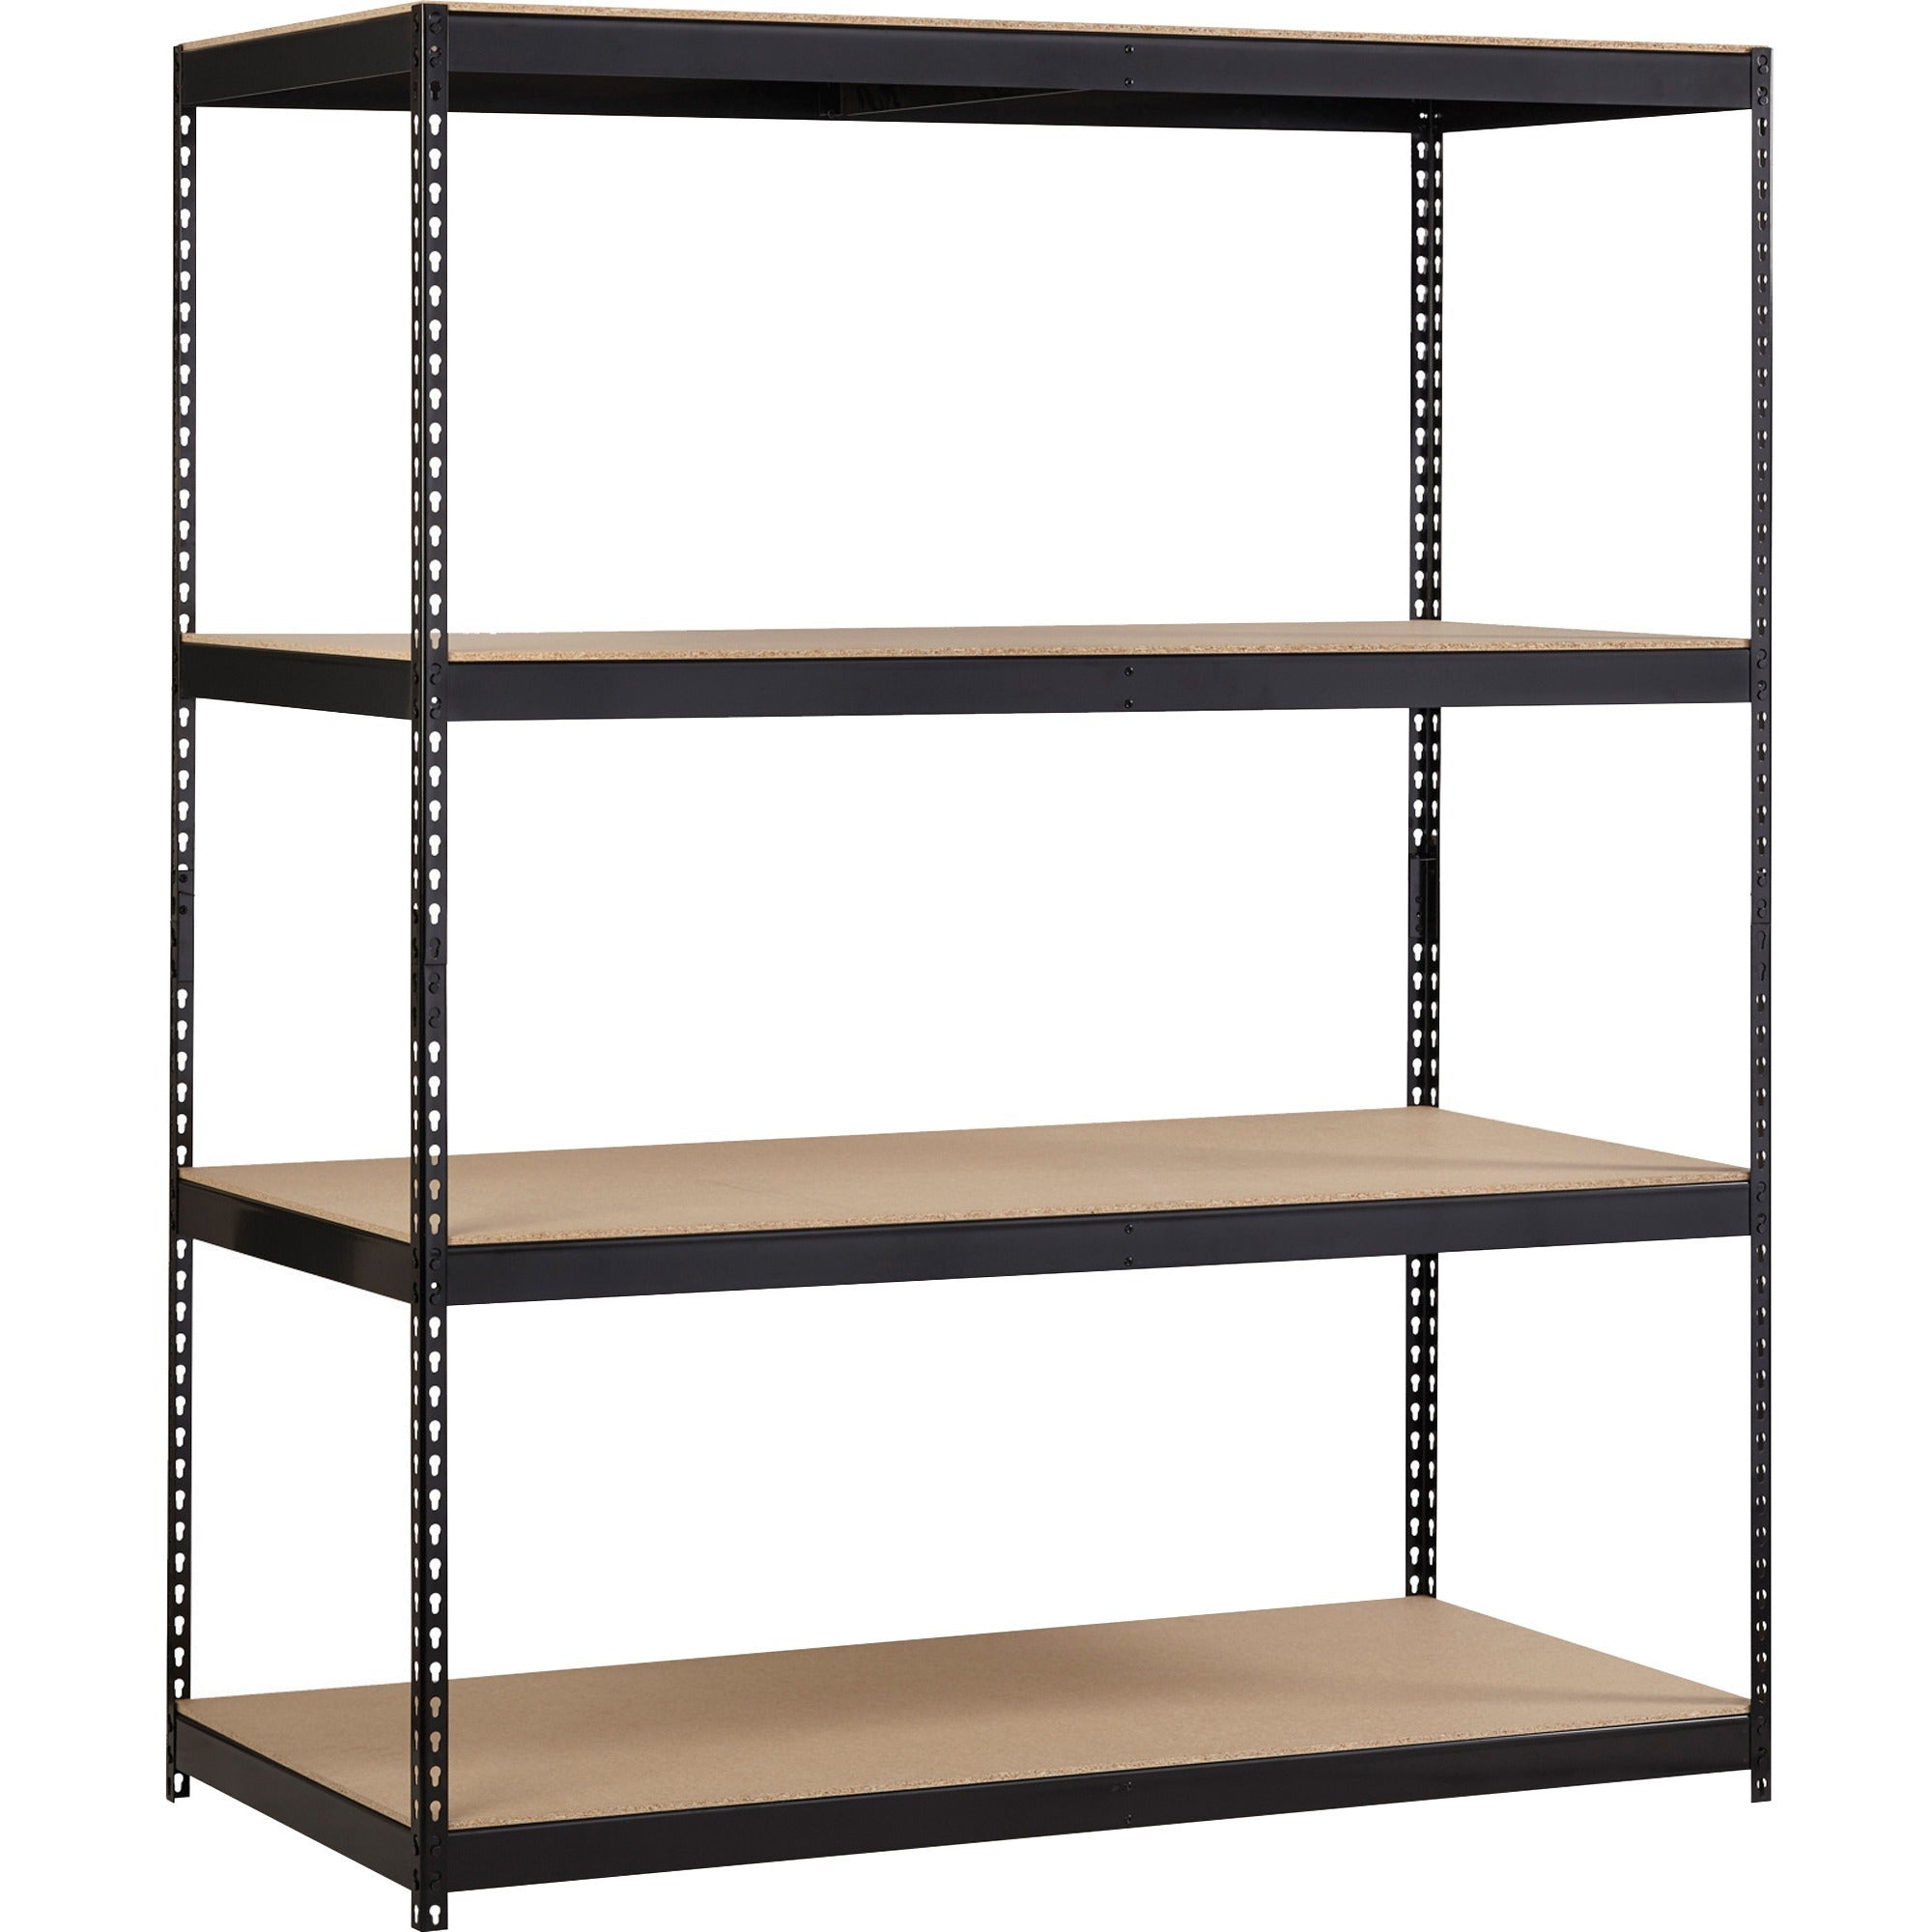 lorell-archival-shelving-80-x-box-4-compartments-84-height-x-69-width-x-33-depth-28%-recycled-black-steel-particleboard-1-each_llr99839 - 4